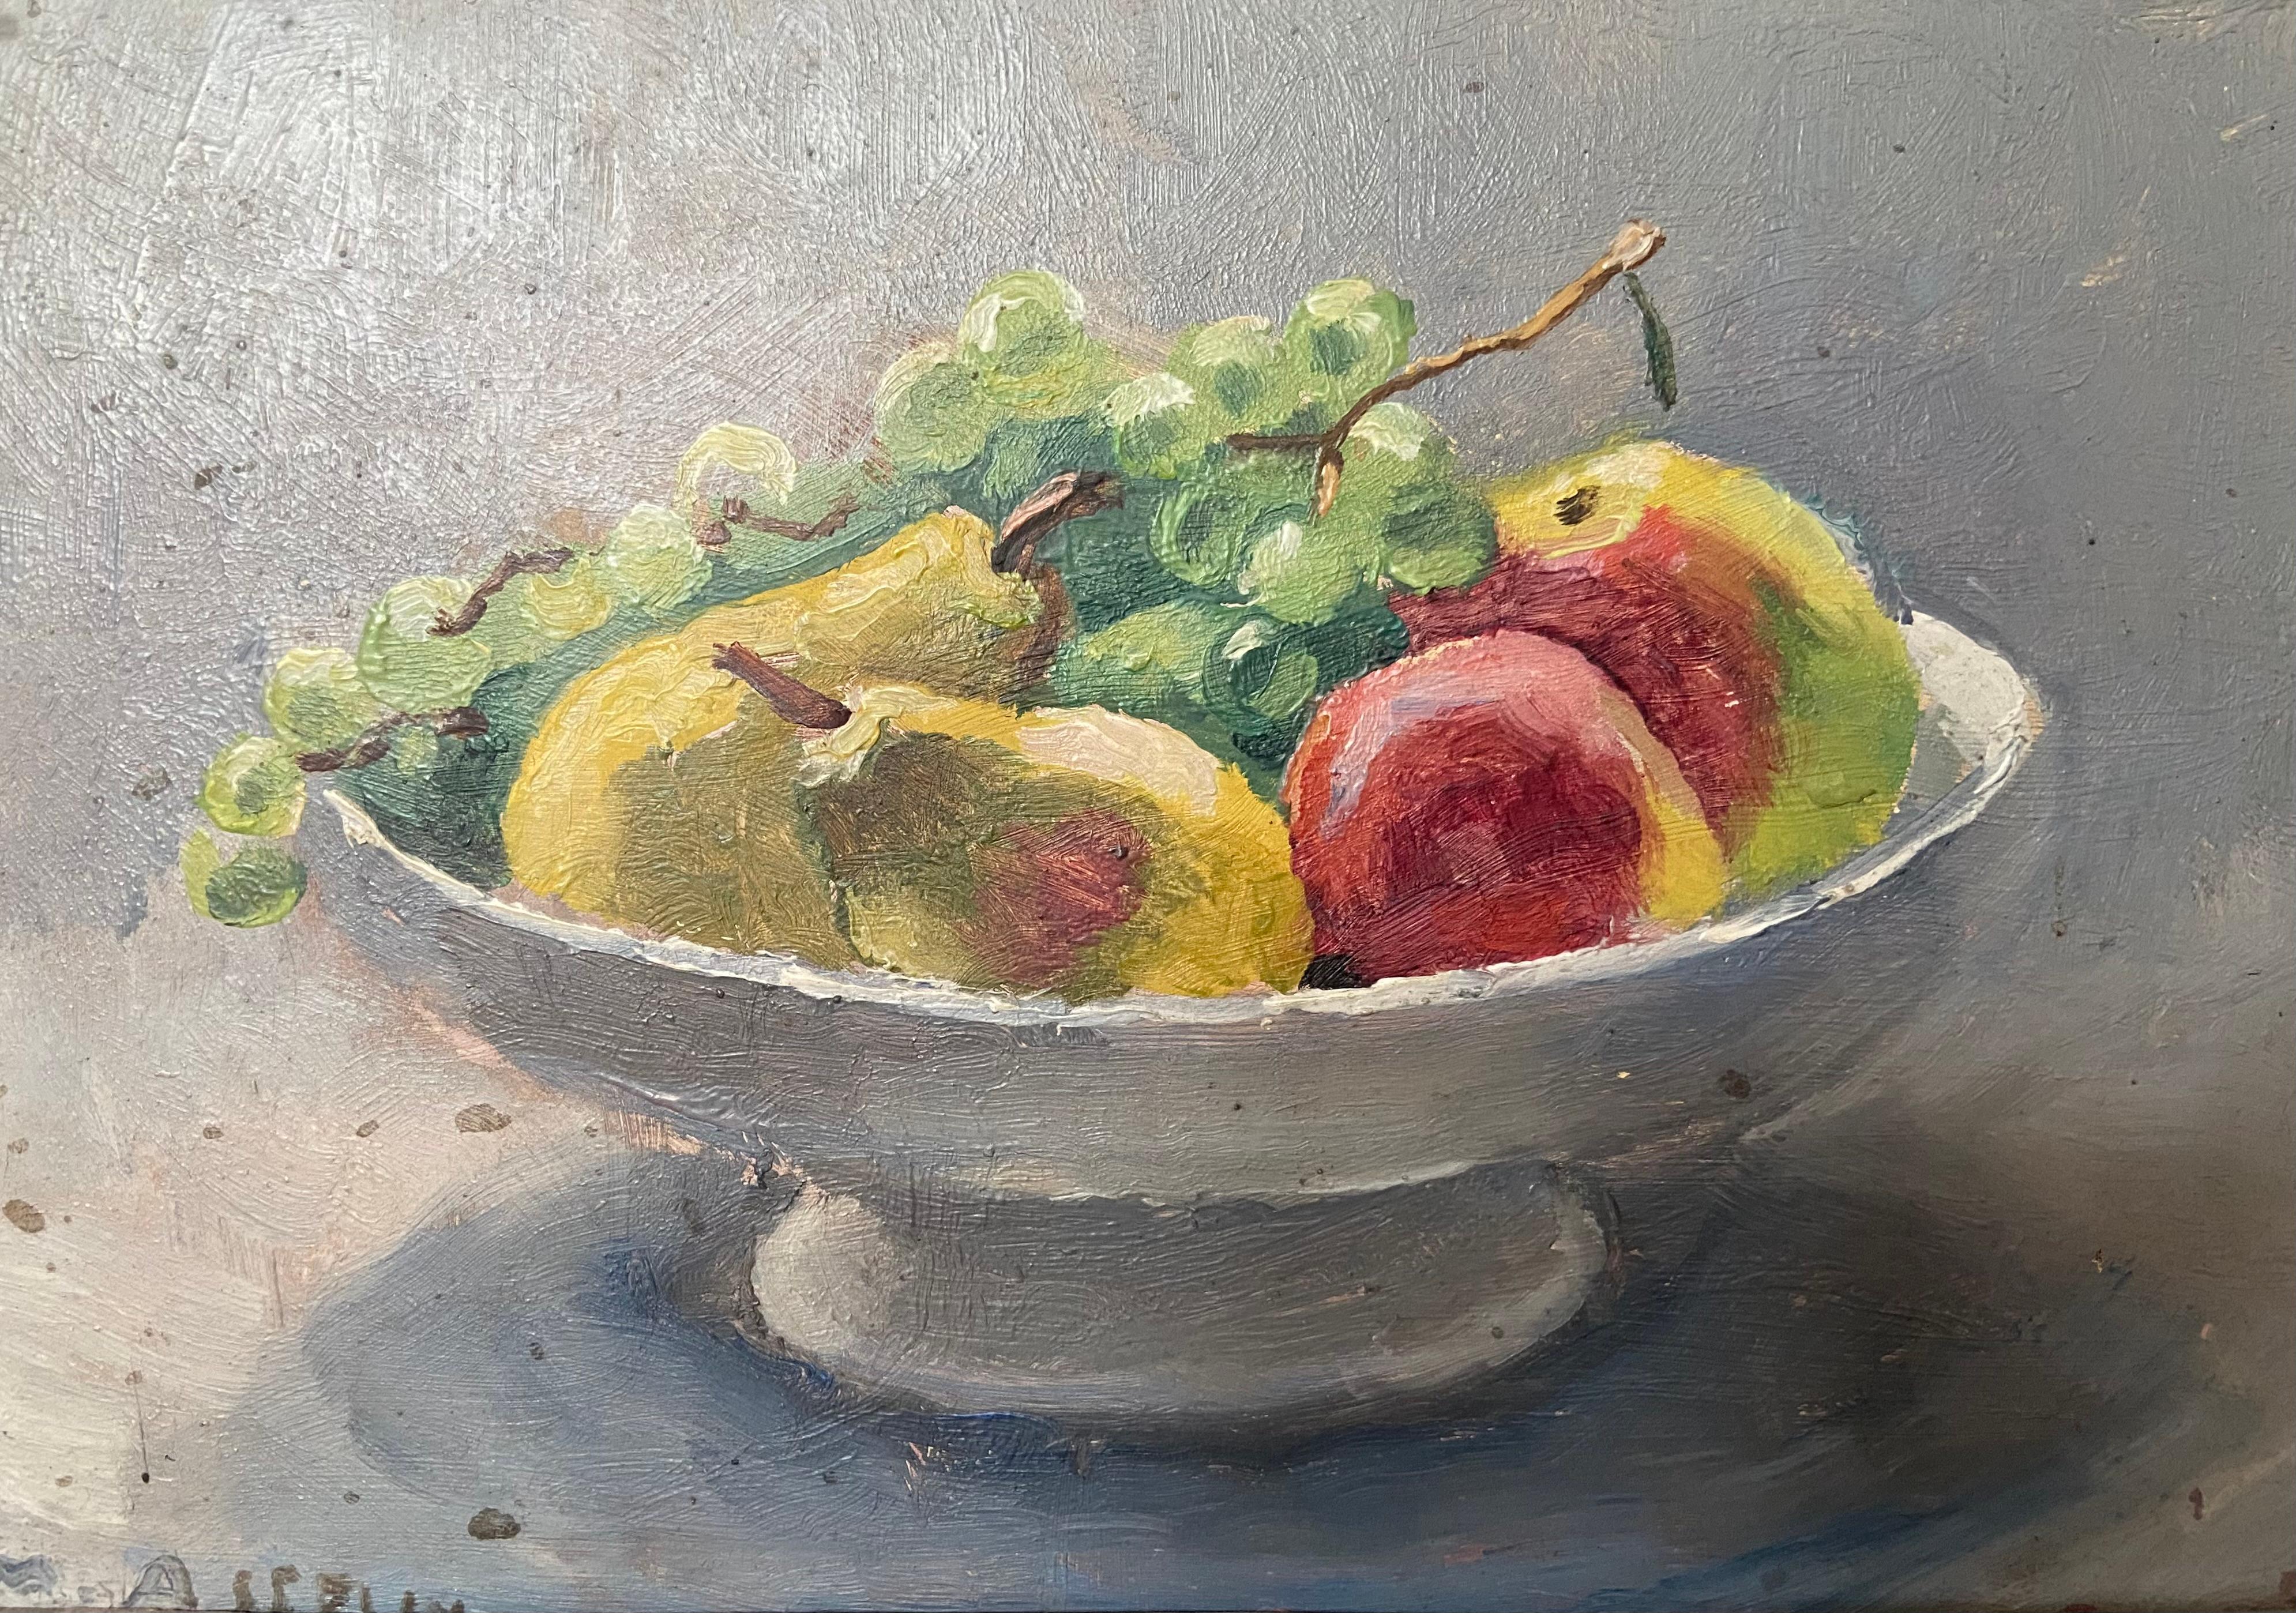 Maurice Asselin (1882-1947) 
Still life with fruits
Signed lower left
Oil on cardboard  
In good condition
15.8 x 21.5 cm
Framed : 25 x 31.5 cm (a hole as visible on the photographs in the upper part)

Maurice Asselin particularly liked to paint